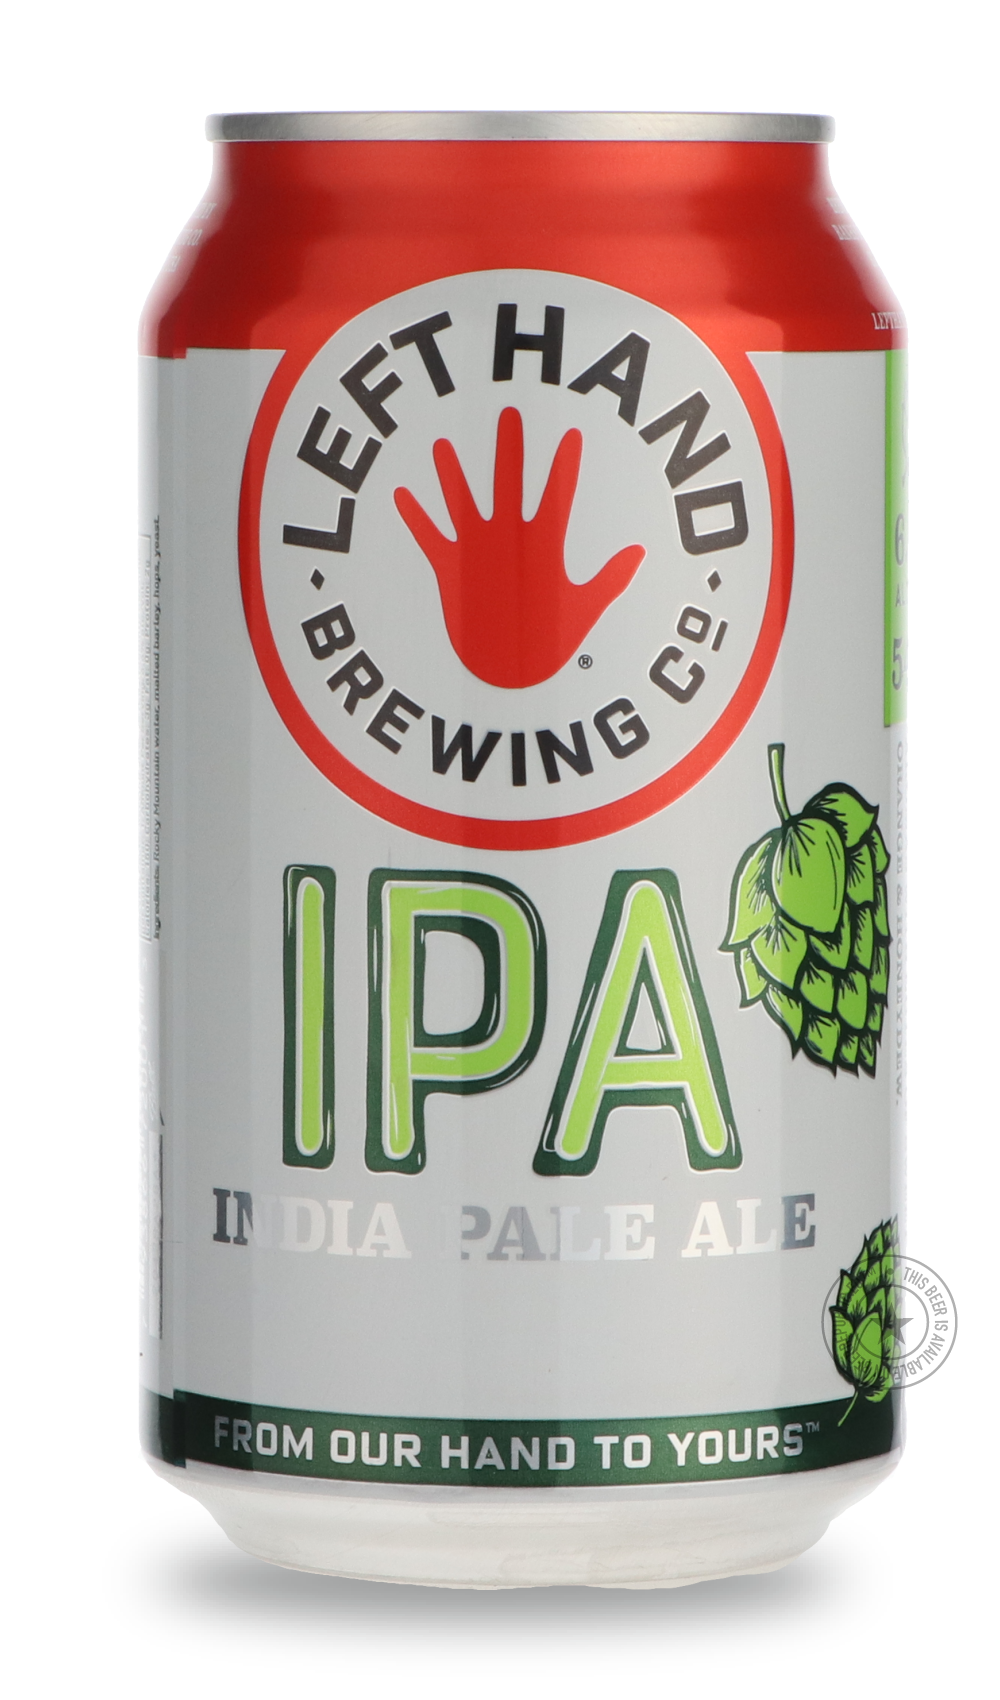 -Left Hand- Left Hand IPA-IPA- Only @ Beer Republic - The best online beer store for American & Canadian craft beer - Buy beer online from the USA and Canada - Bier online kopen - Amerikaans bier kopen - Craft beer store - Craft beer kopen - Amerikanisch bier kaufen - Bier online kaufen - Acheter biere online - IPA - Stout - Porter - New England IPA - Hazy IPA - Imperial Stout - Barrel Aged - Barrel Aged Imperial Stout - Brown - Dark beer - Blond - Blonde - Pilsner - Lager - Wheat - Weizen - Amber - Barley 